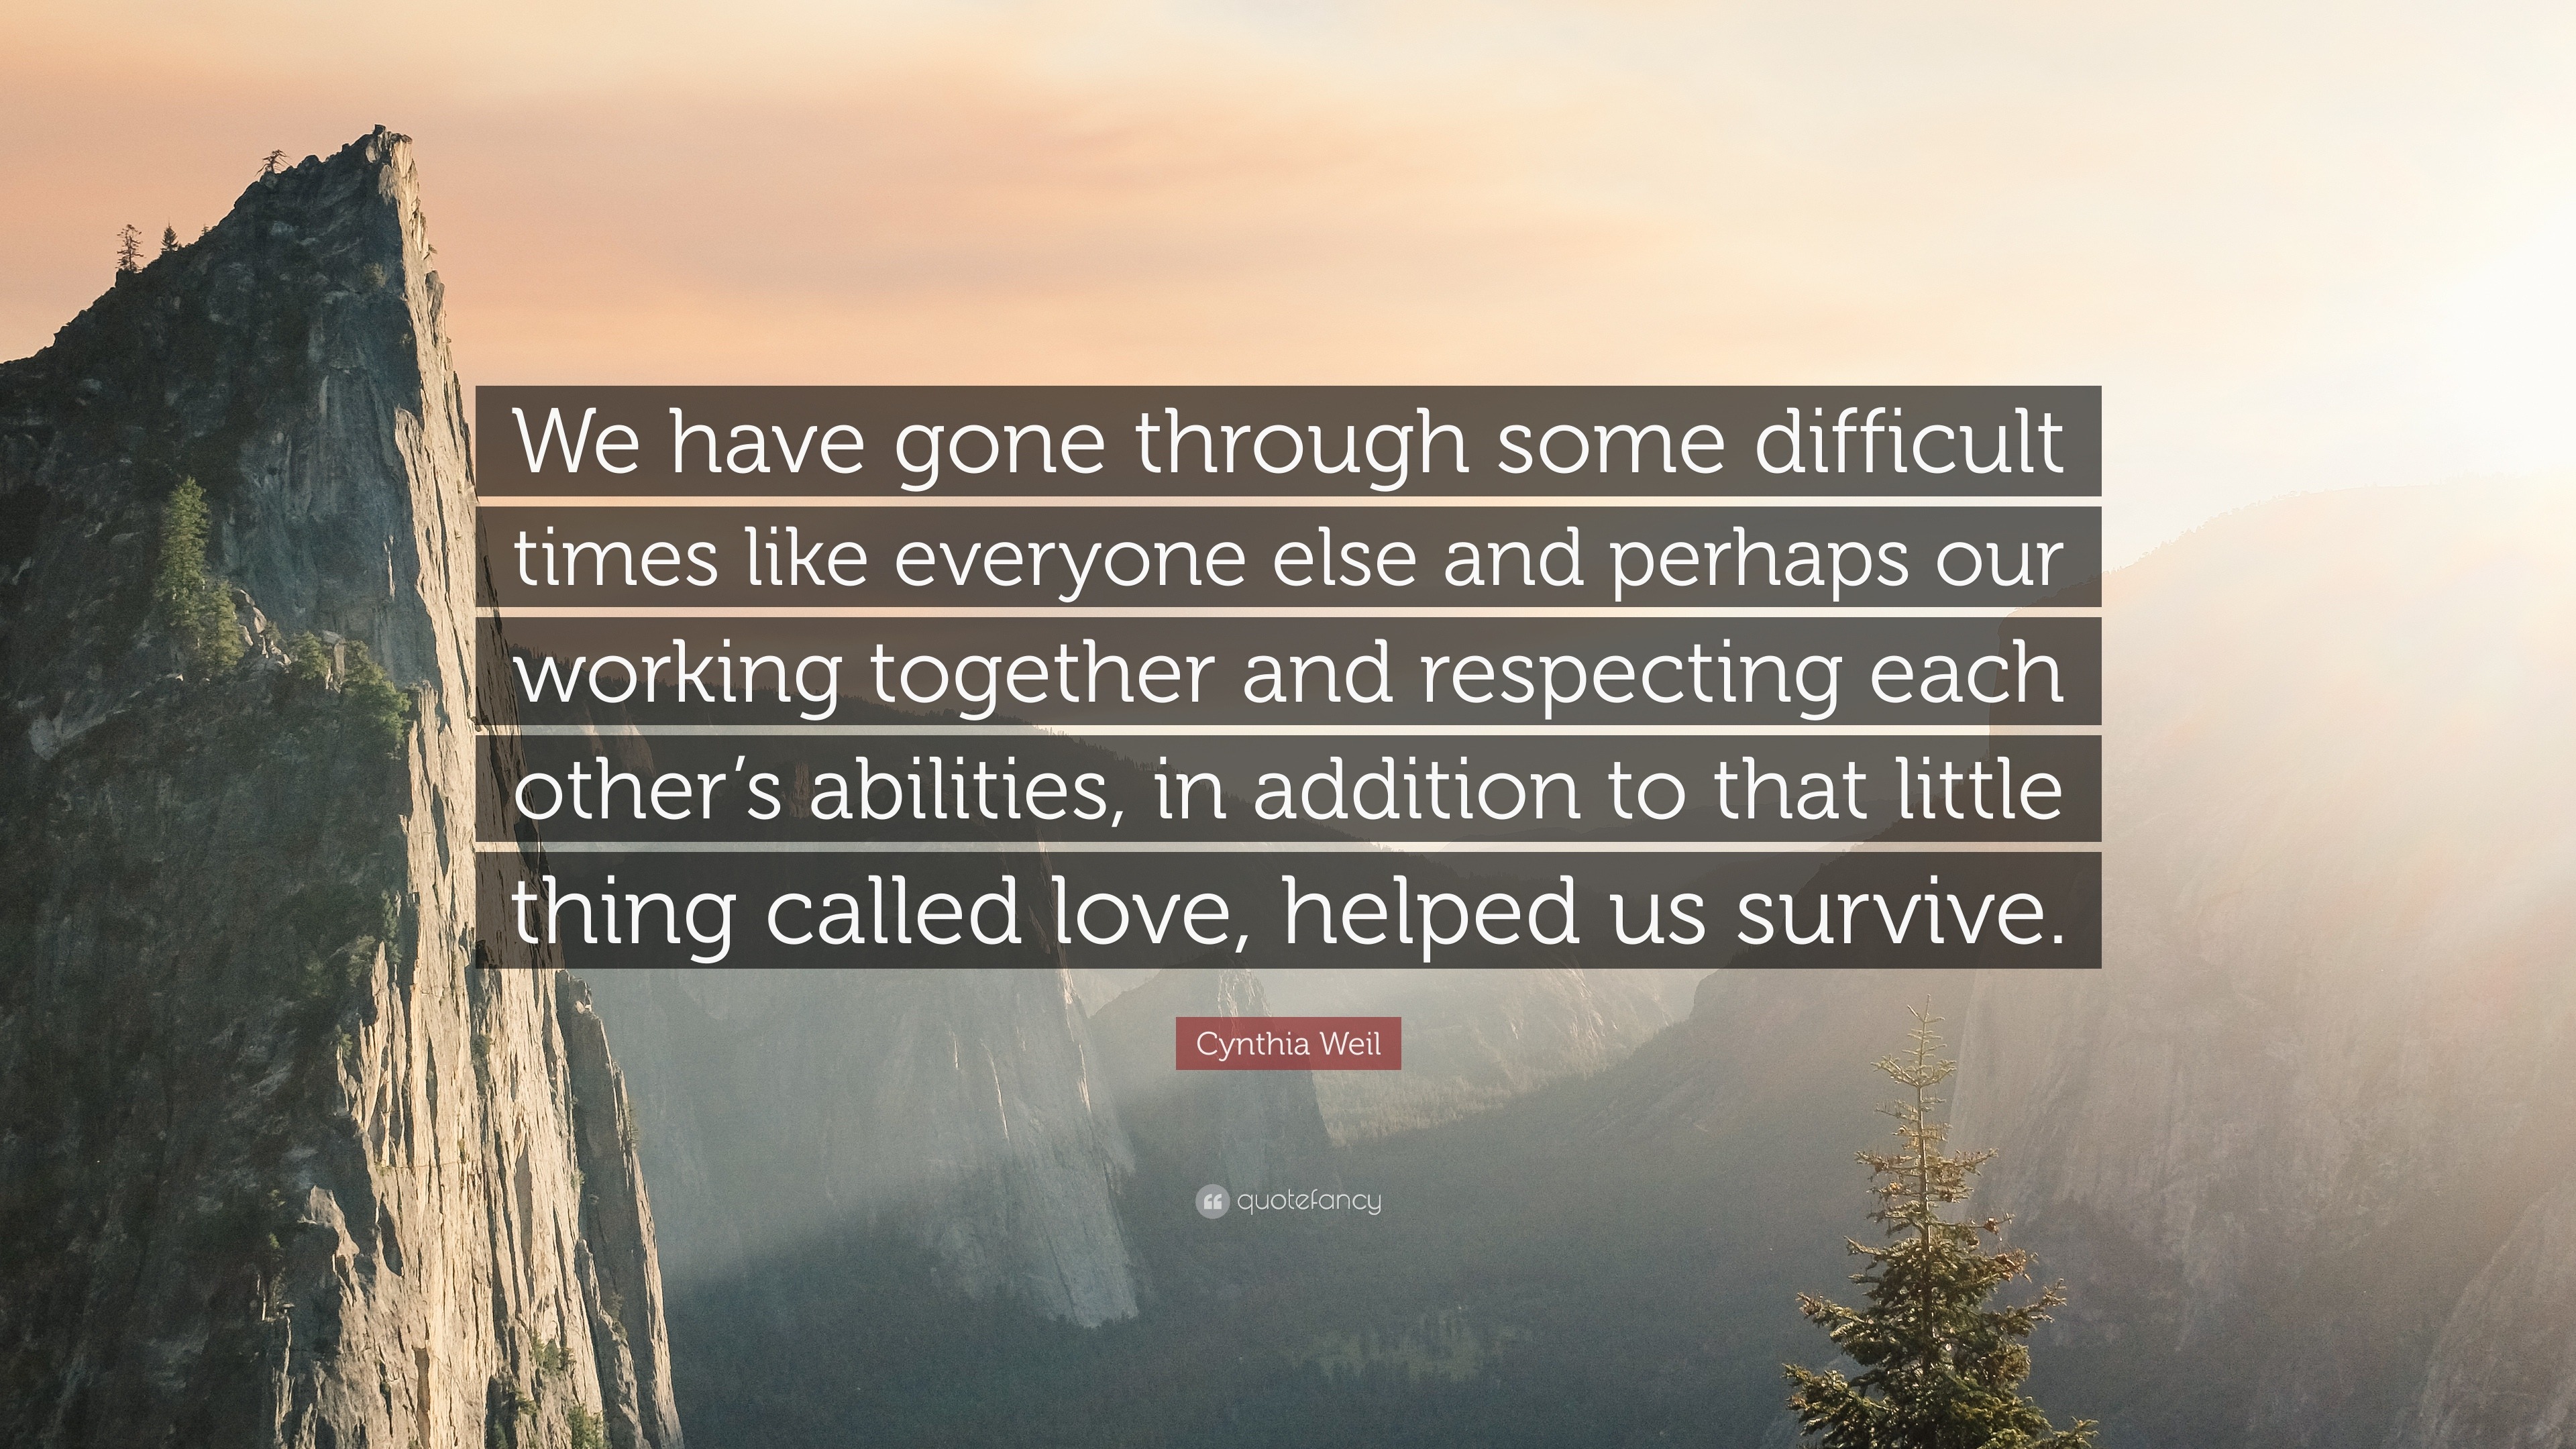 Cynthia Weil Quote We Have Gone Through Some Difficult Times Like Everyone Else And Perhaps Our Working Together And Respecting Each Other